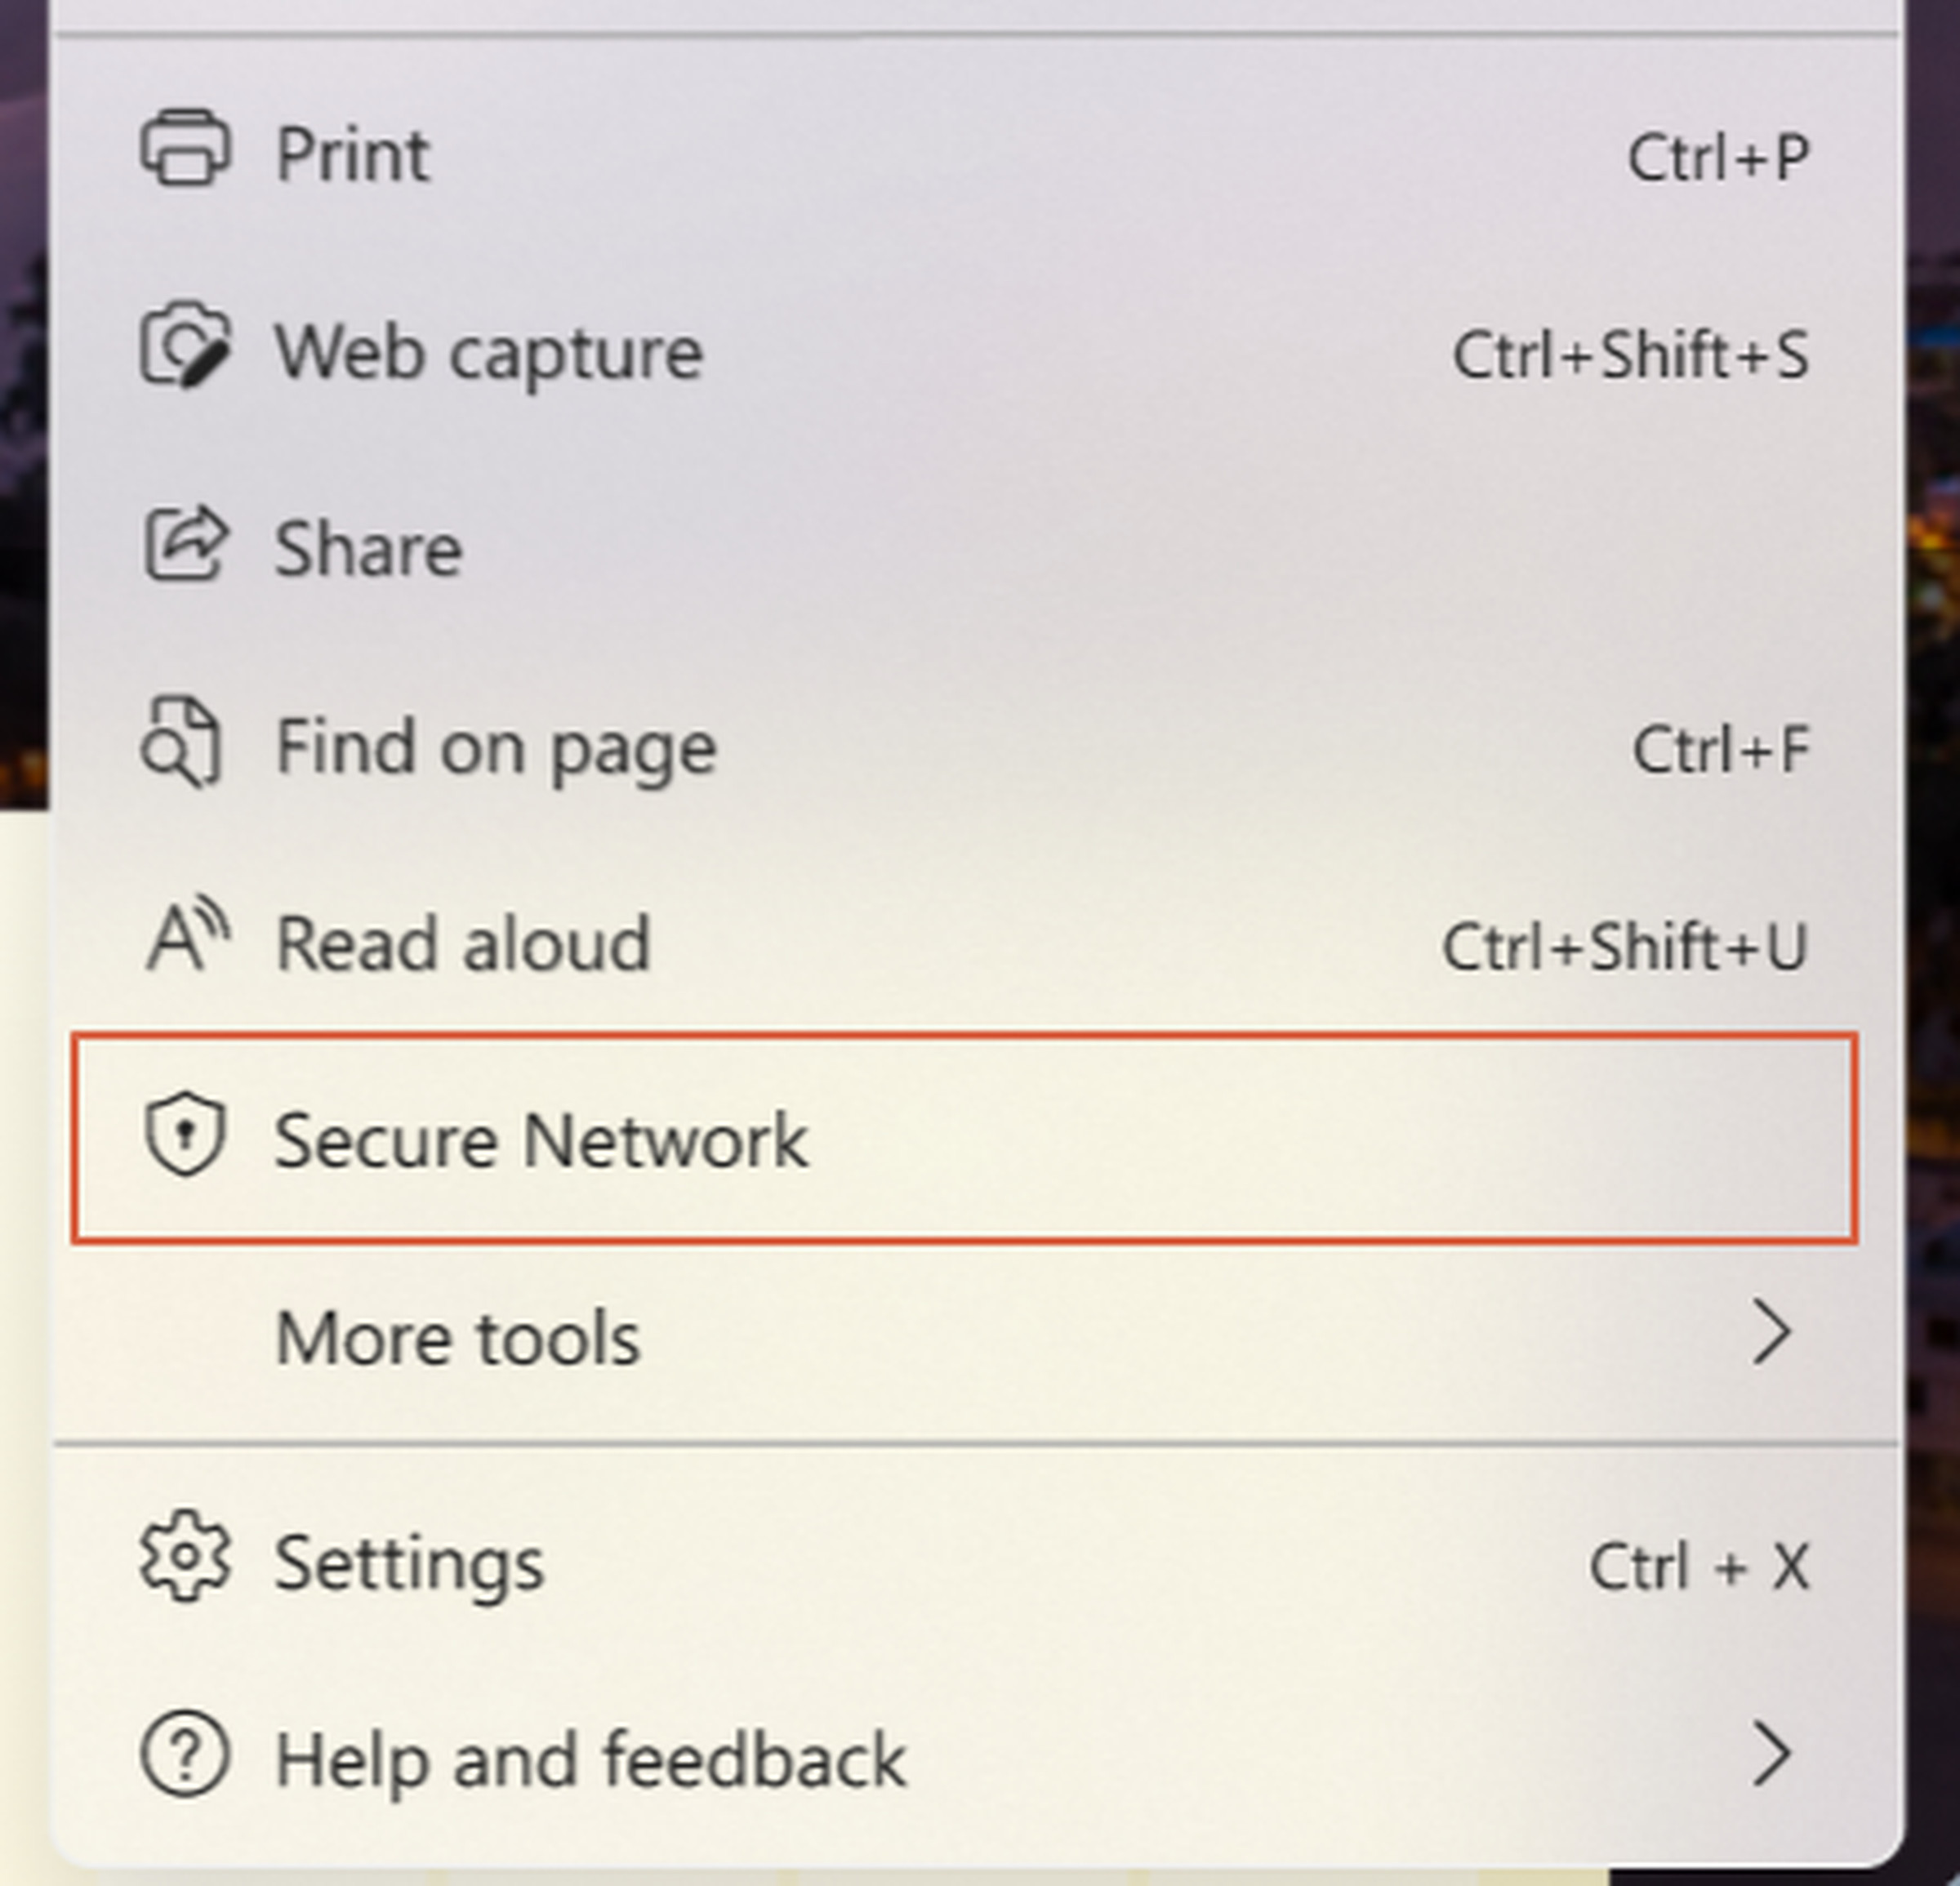 Click on “Secure Network” to turn the VPN service on.